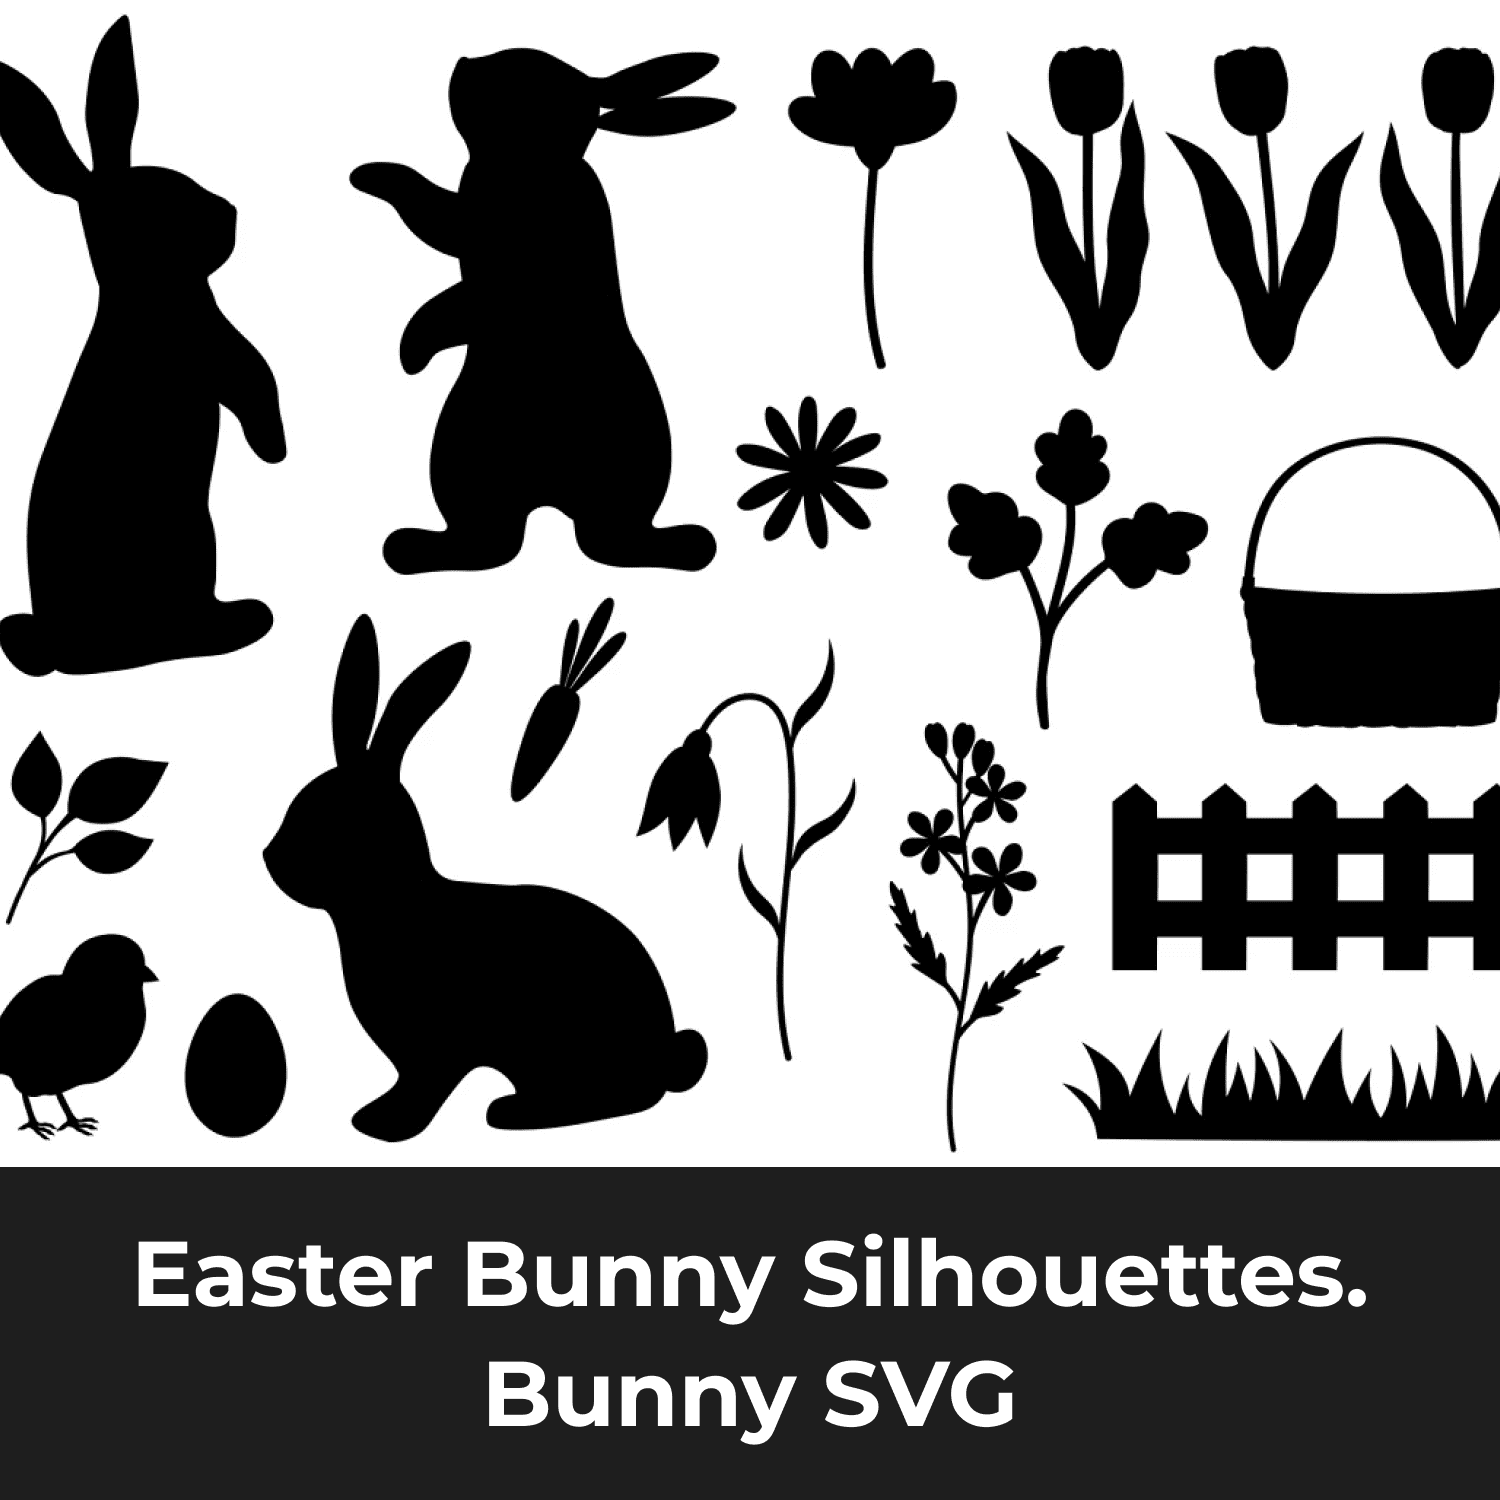 Easter Bunny Silhouettes. Bunny SVG cover.